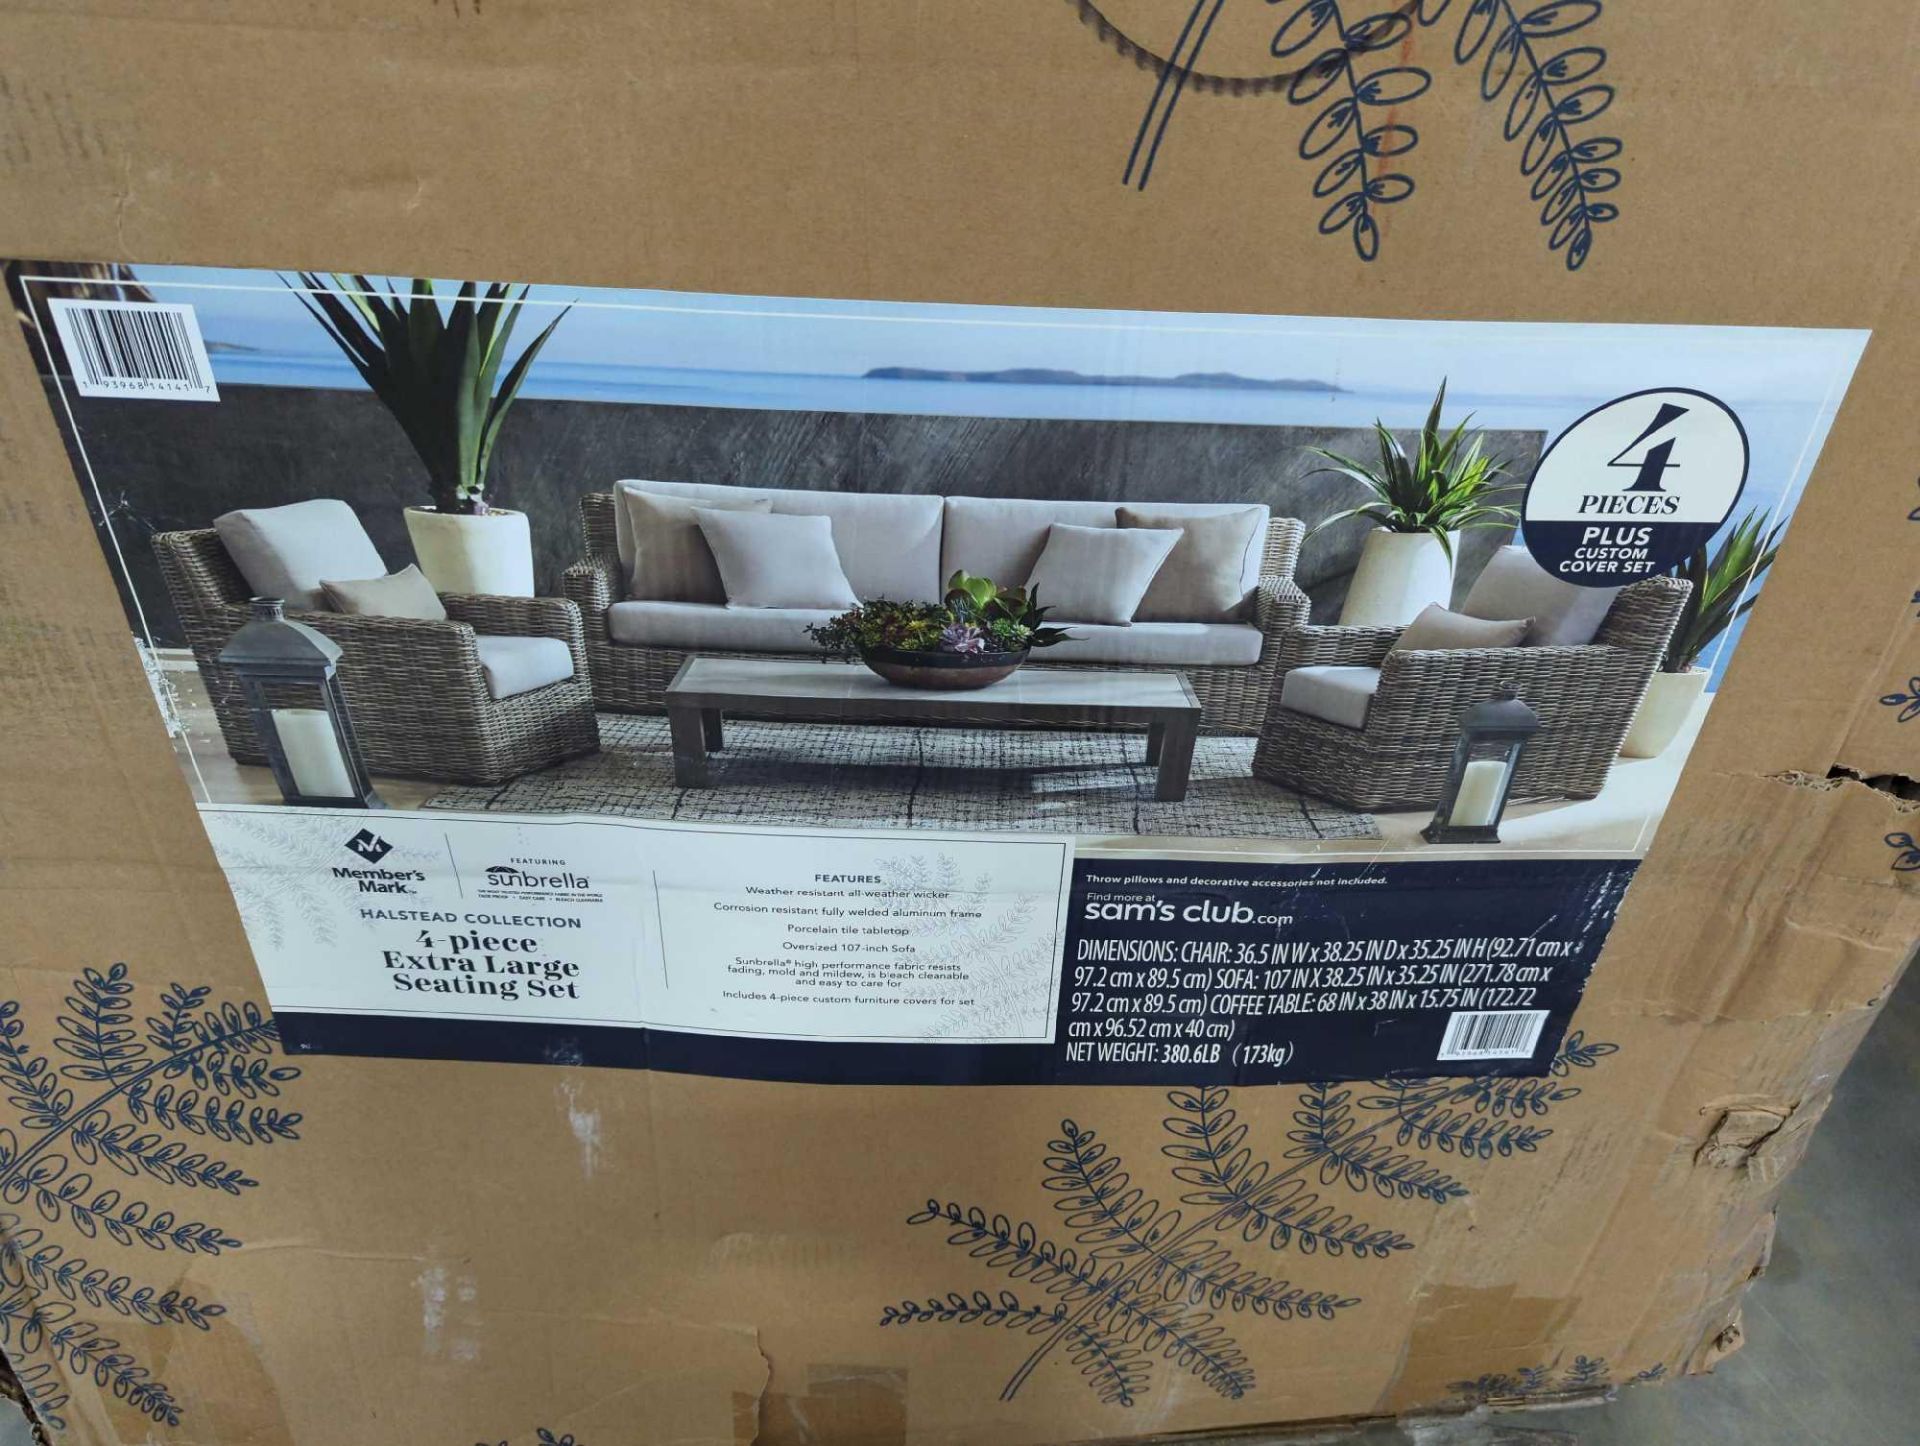 Outdoor Seating Set - Image 7 of 10